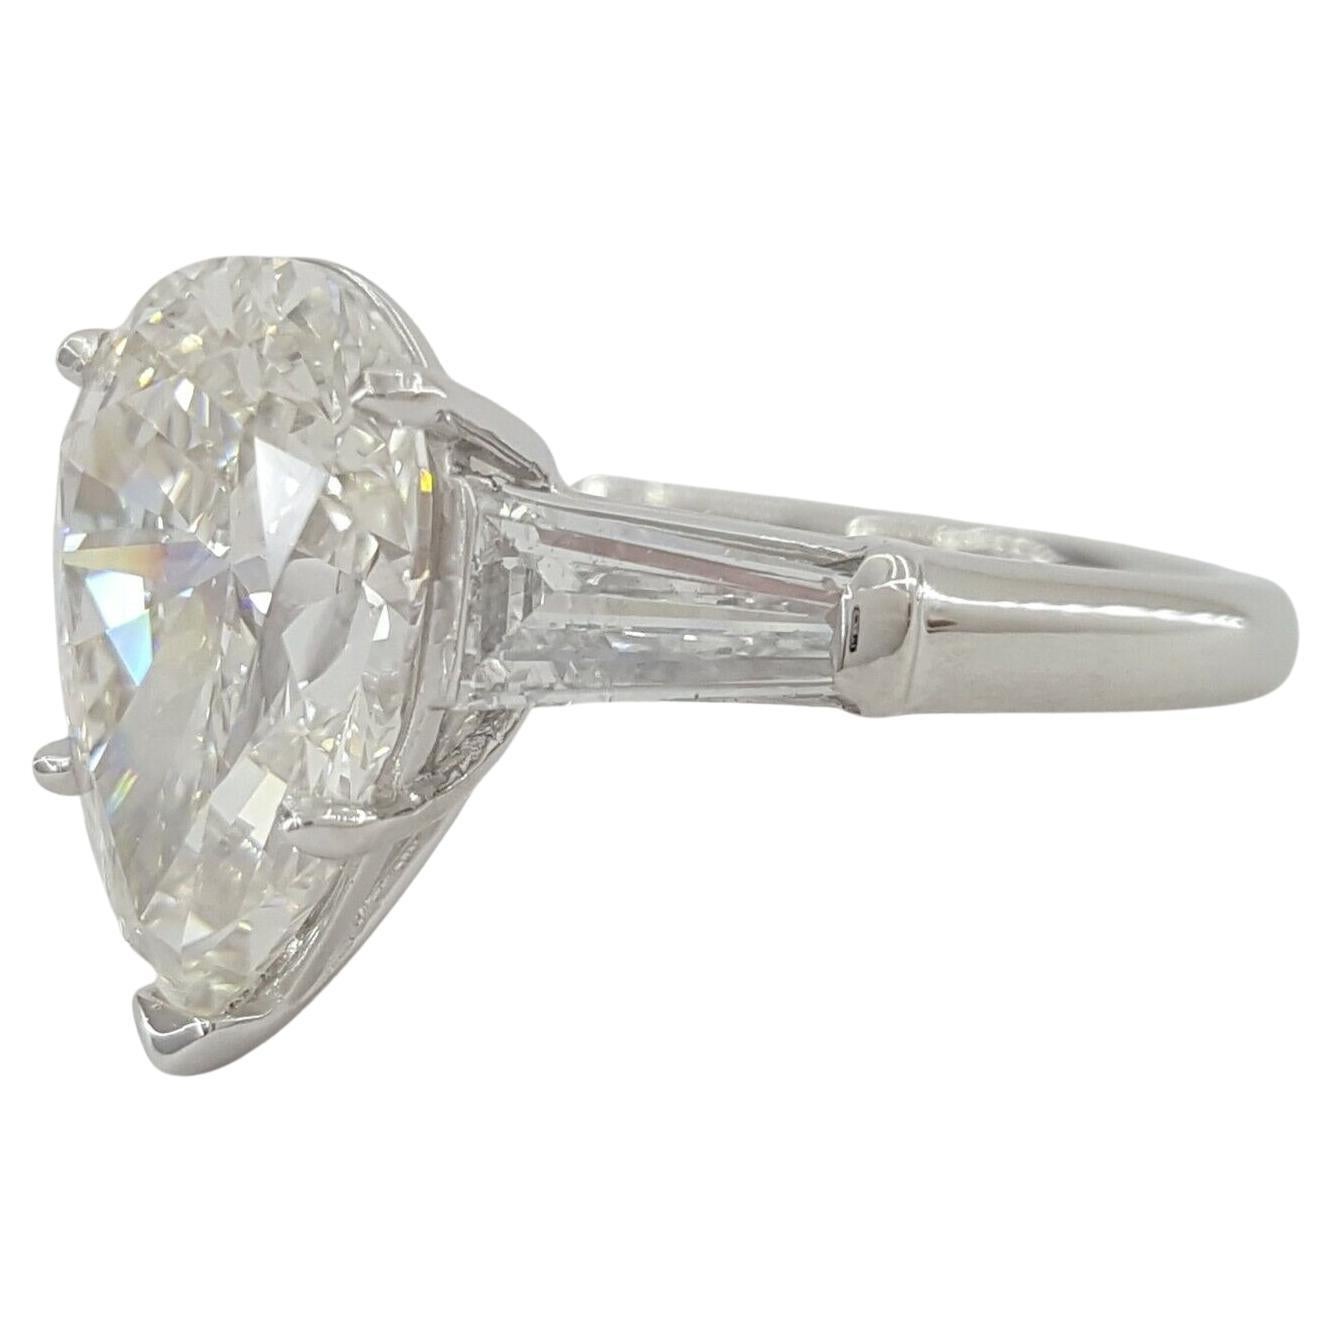 An exquisite GIA certified 4.24 carat pear cut diamond with excellent brightness and 100% eye clean 
The ring weighs 7.5 grams, size 5.75, the center stone is a Natural Pear Brilliant Cut diamond weighing 4.24 ct, I in color, VVS2 in clarity, 63.6%